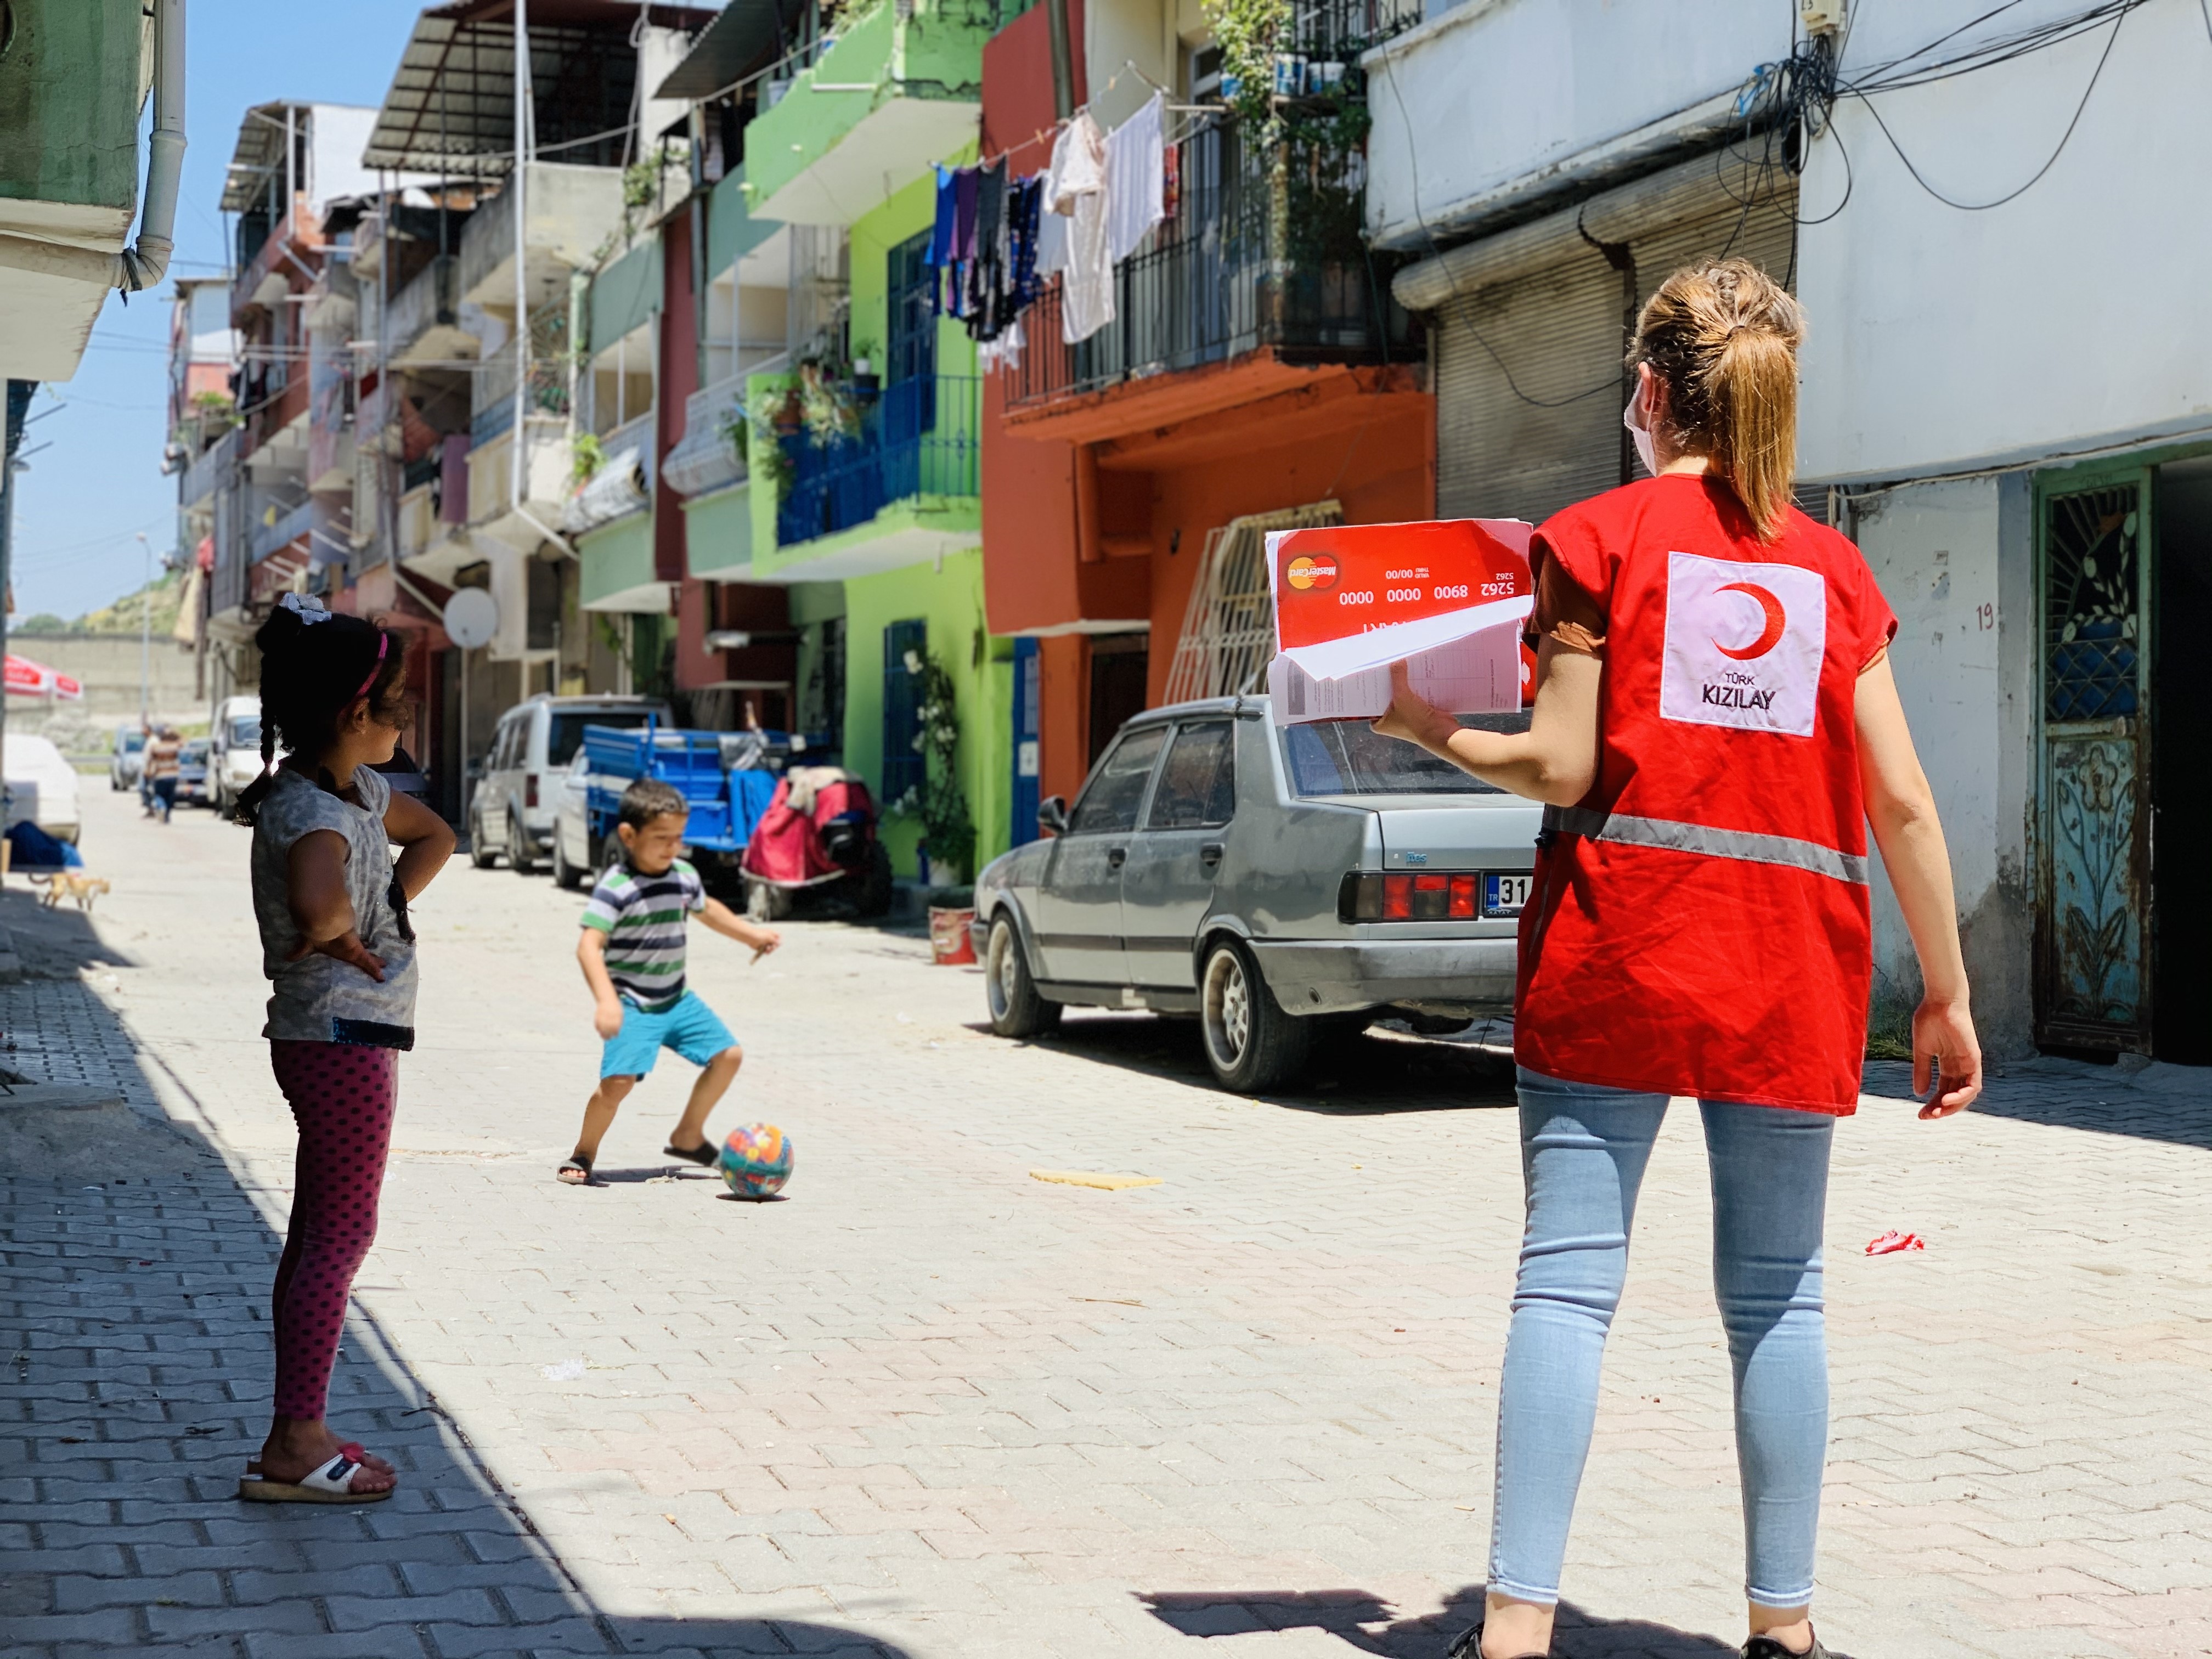 Two children play ball in the street with a red crescent worker